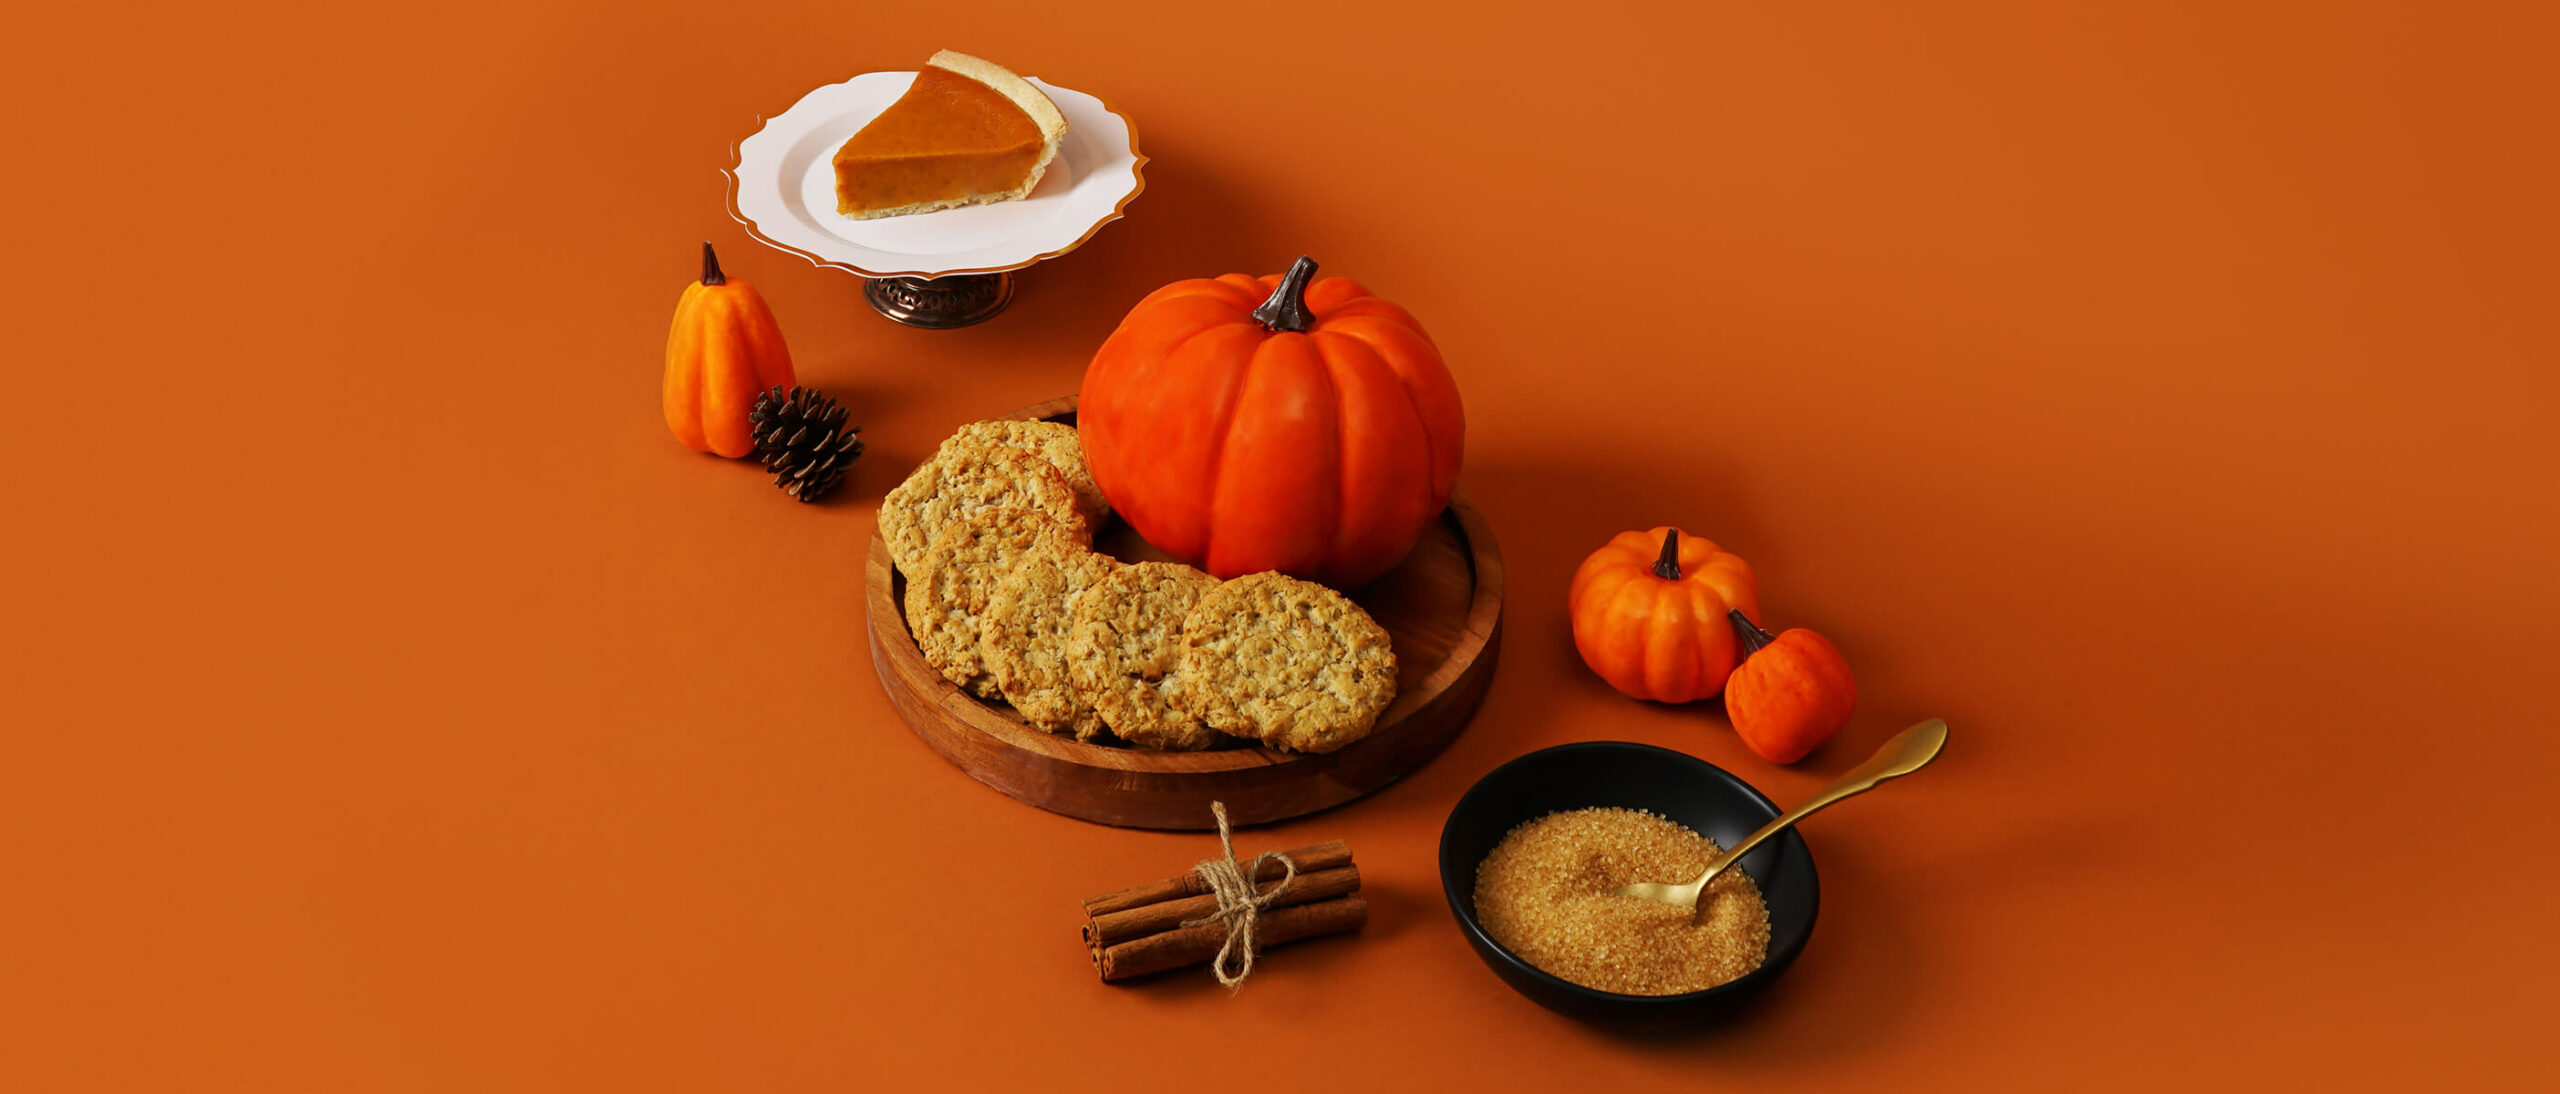 8 Yummy Ways To Use Pumpkin That Aren’t In Your Coffee